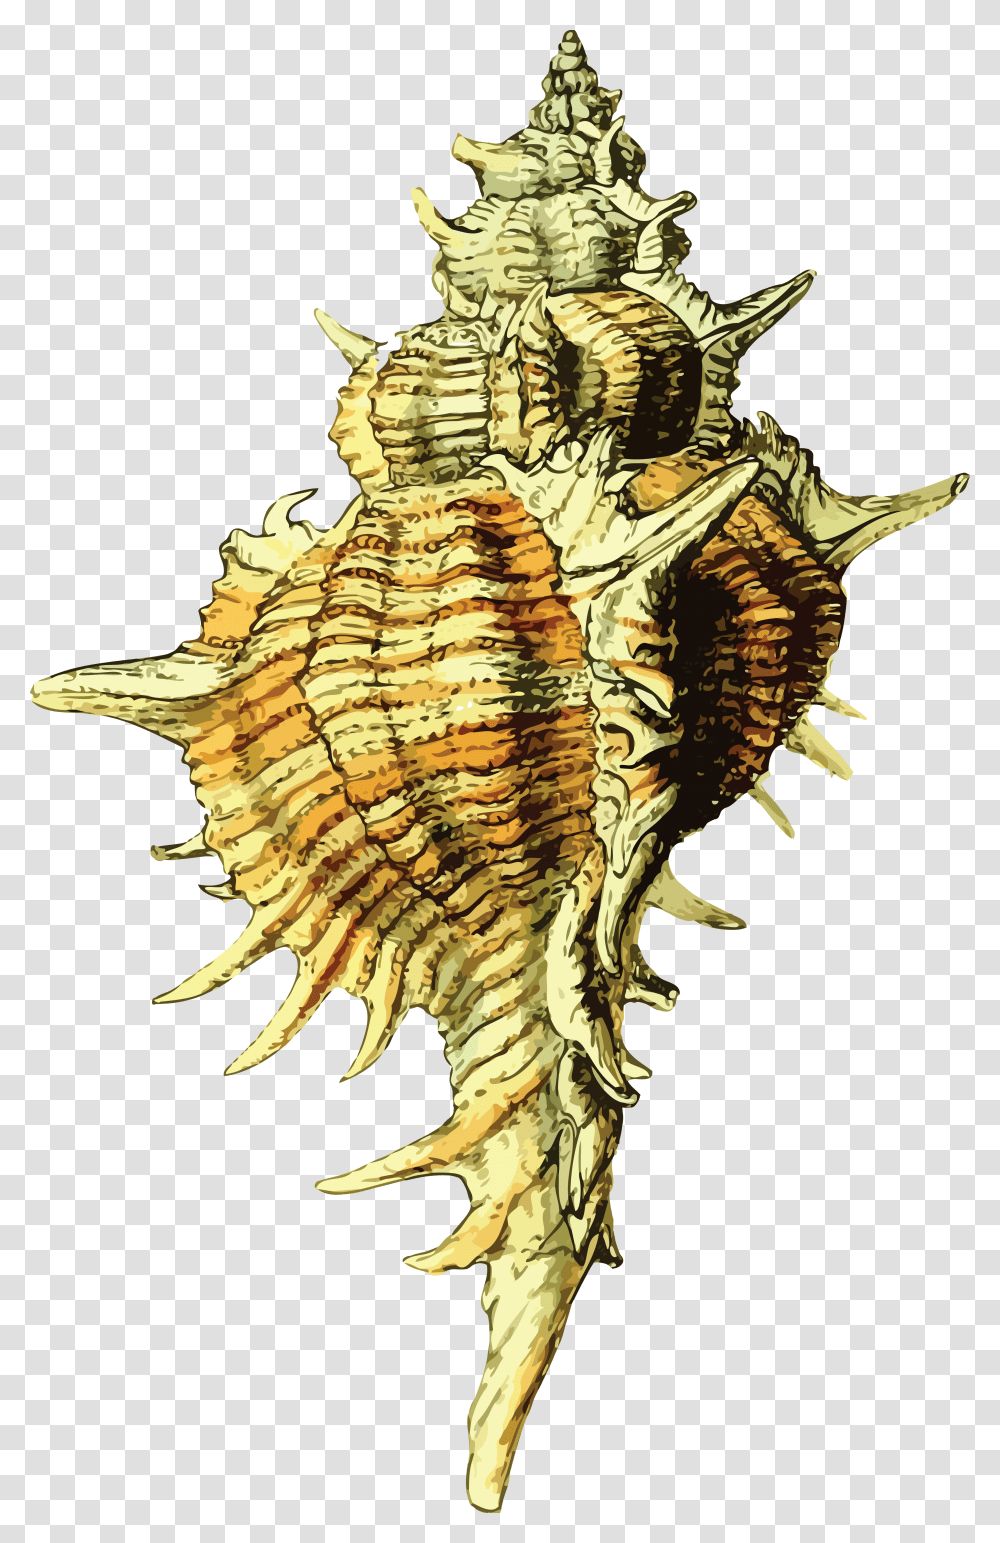 Free Clipart Of A Conch Sea Shell Seashell, Animal, Reptile, Bird, Fossil Transparent Png